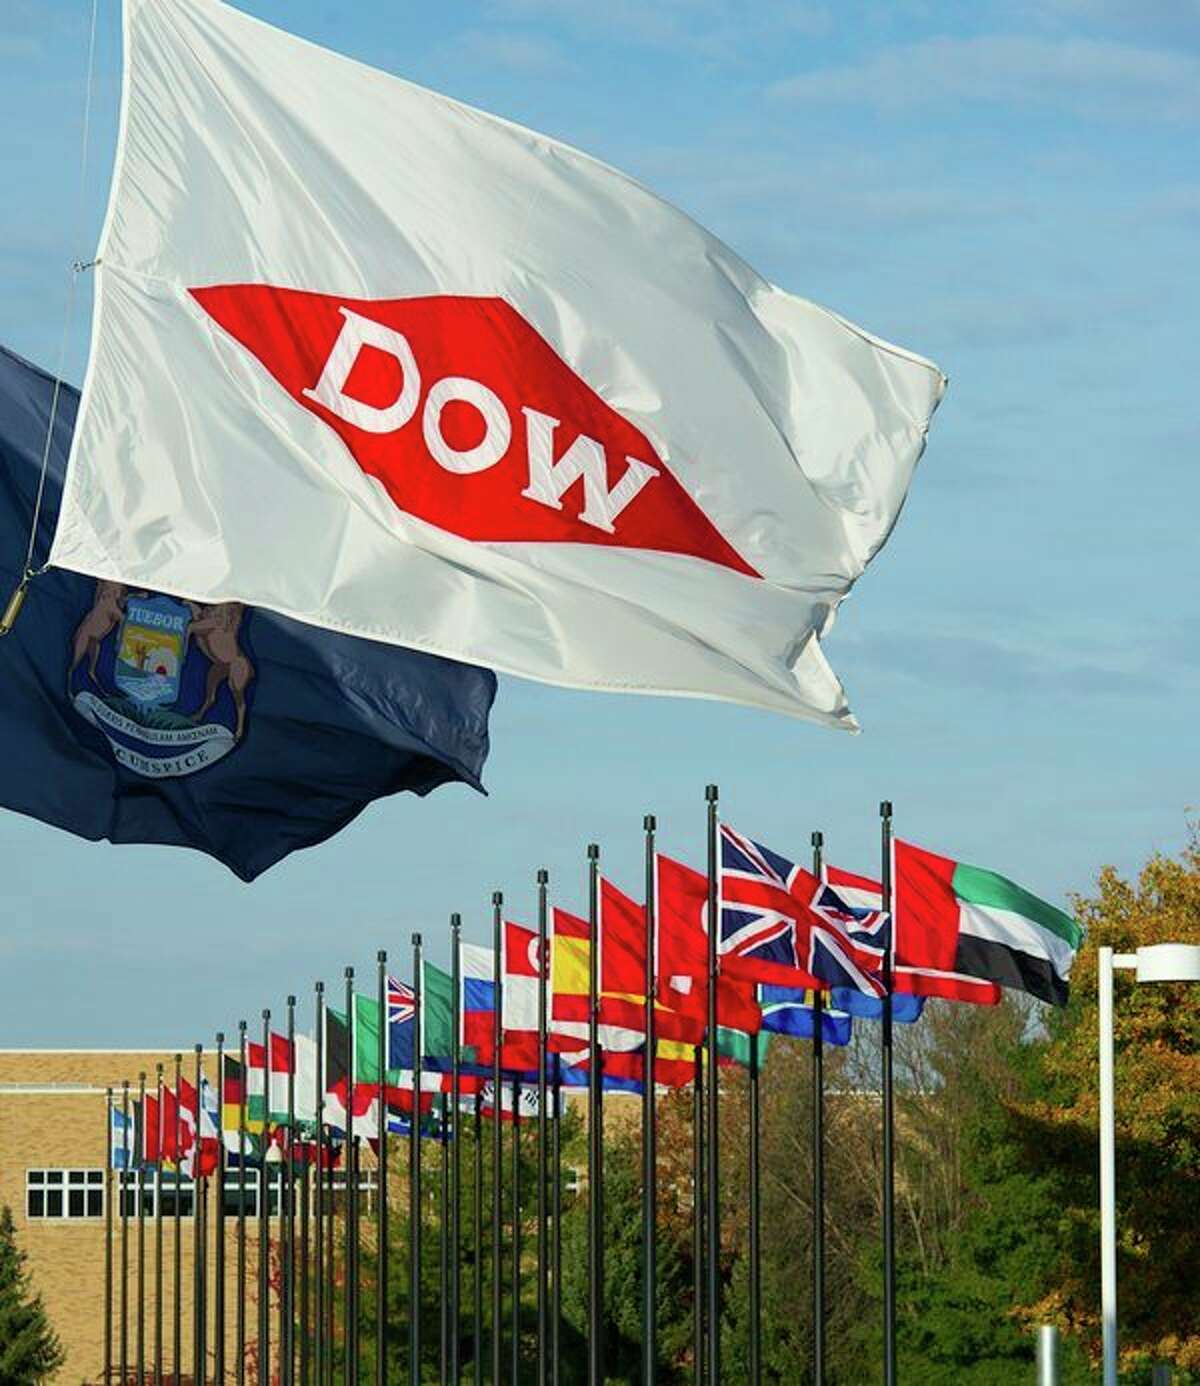 Dow's corporate headquarters in Midland. (Photo provided)